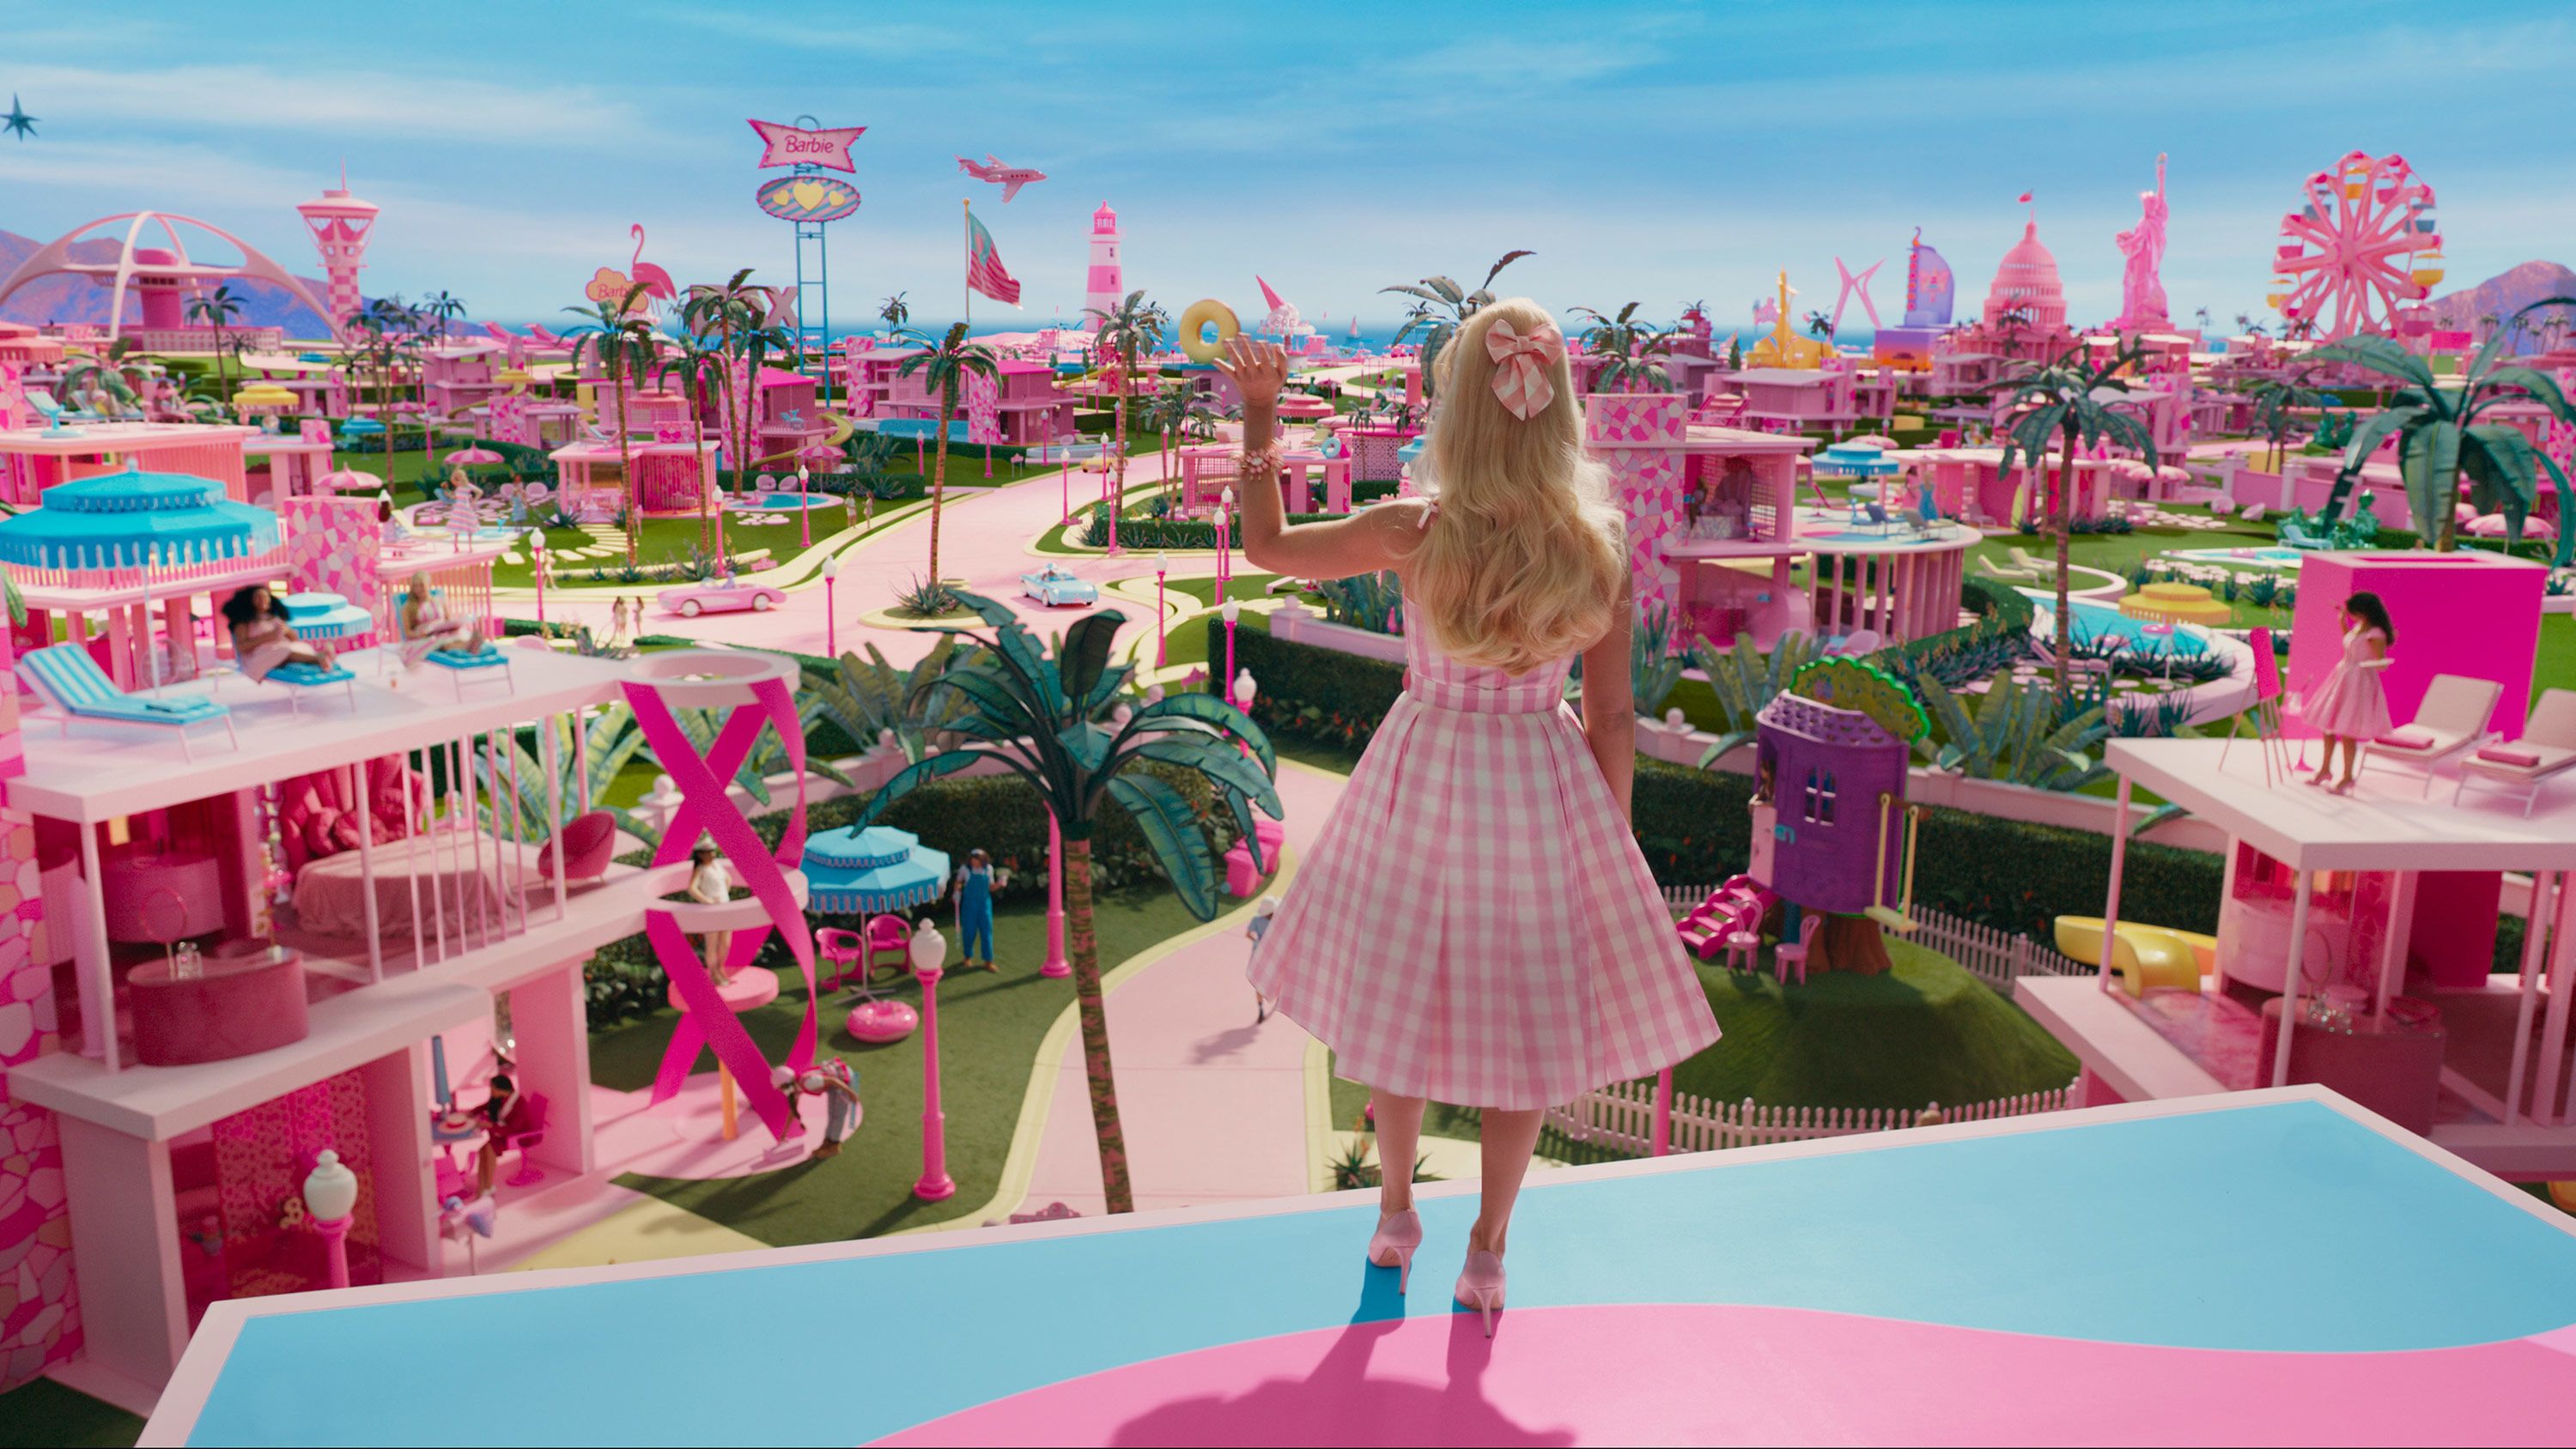 Barbie' teaser trailer turns the world pink and sparkly | CNN